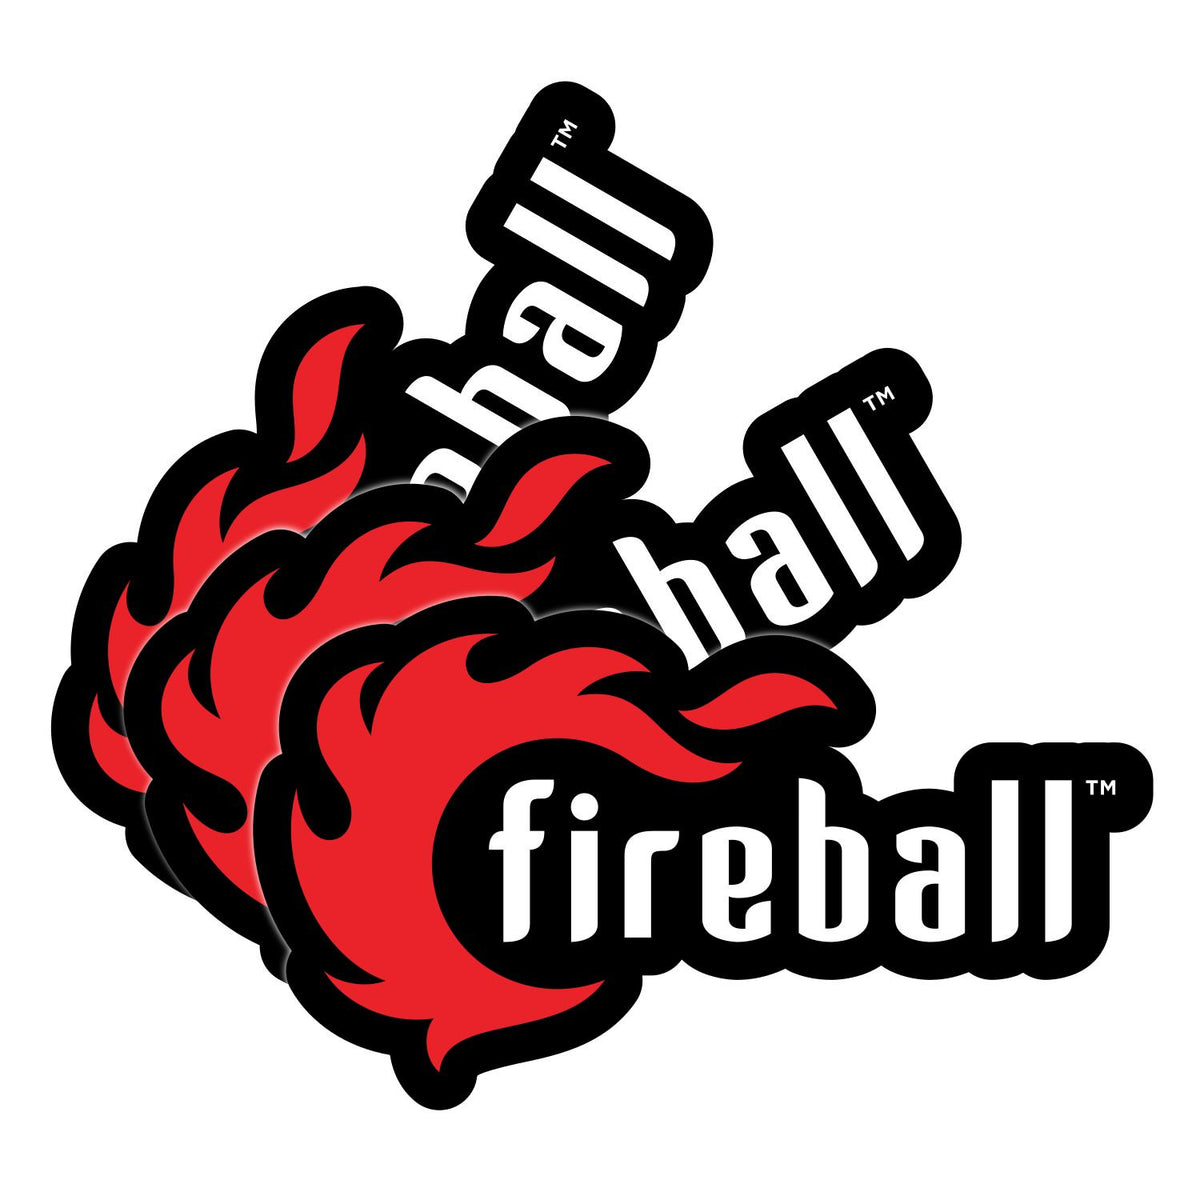 Fireball Logo Cut Out Stickers 3.75" (9.6 cm) - 3 Stickers